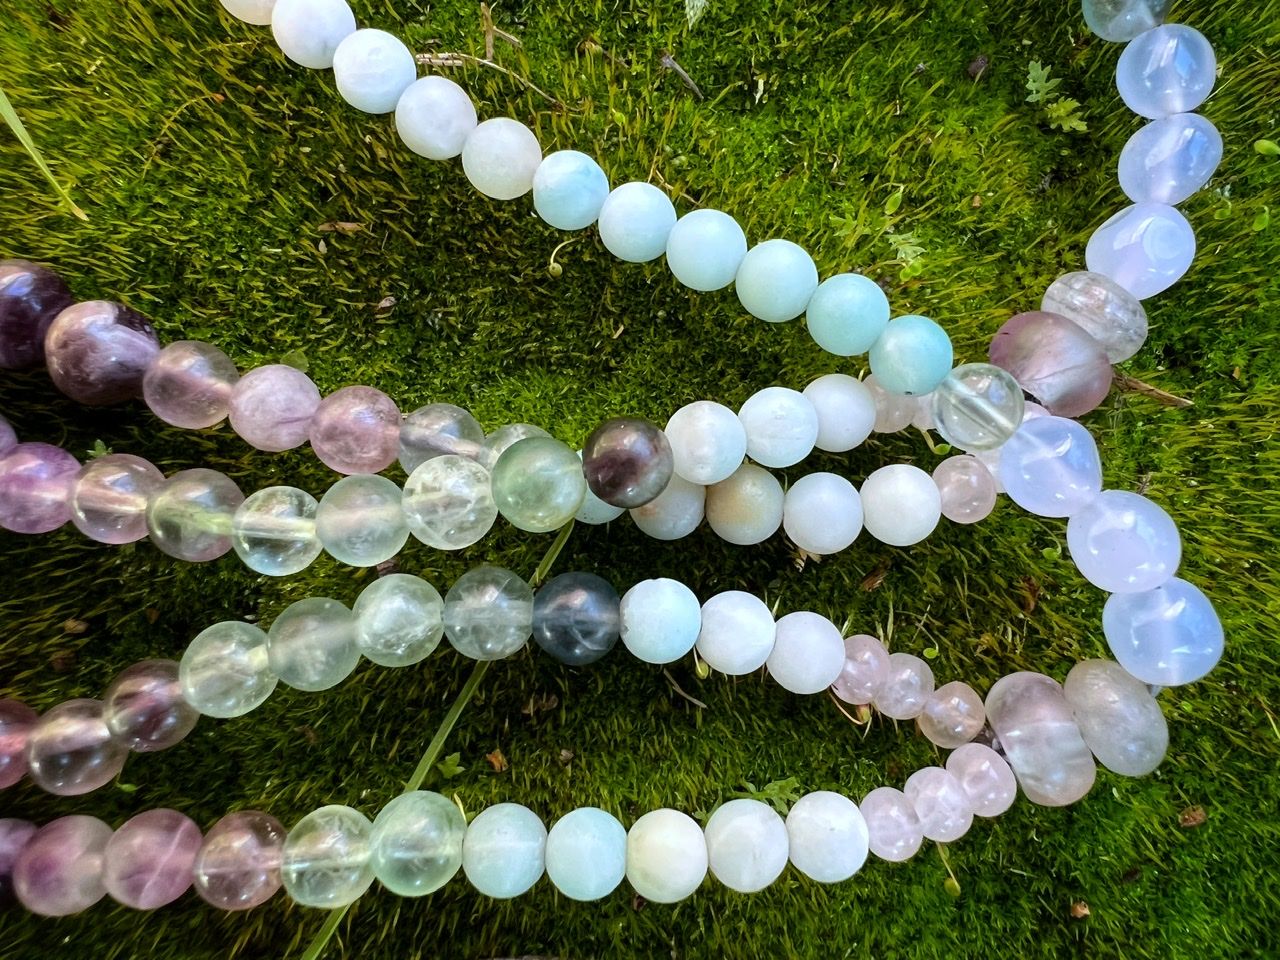 A necklace of clear, pink and grey Quartz, purple amethyst, green fluorite and blue chalcedony rests on lush green moss